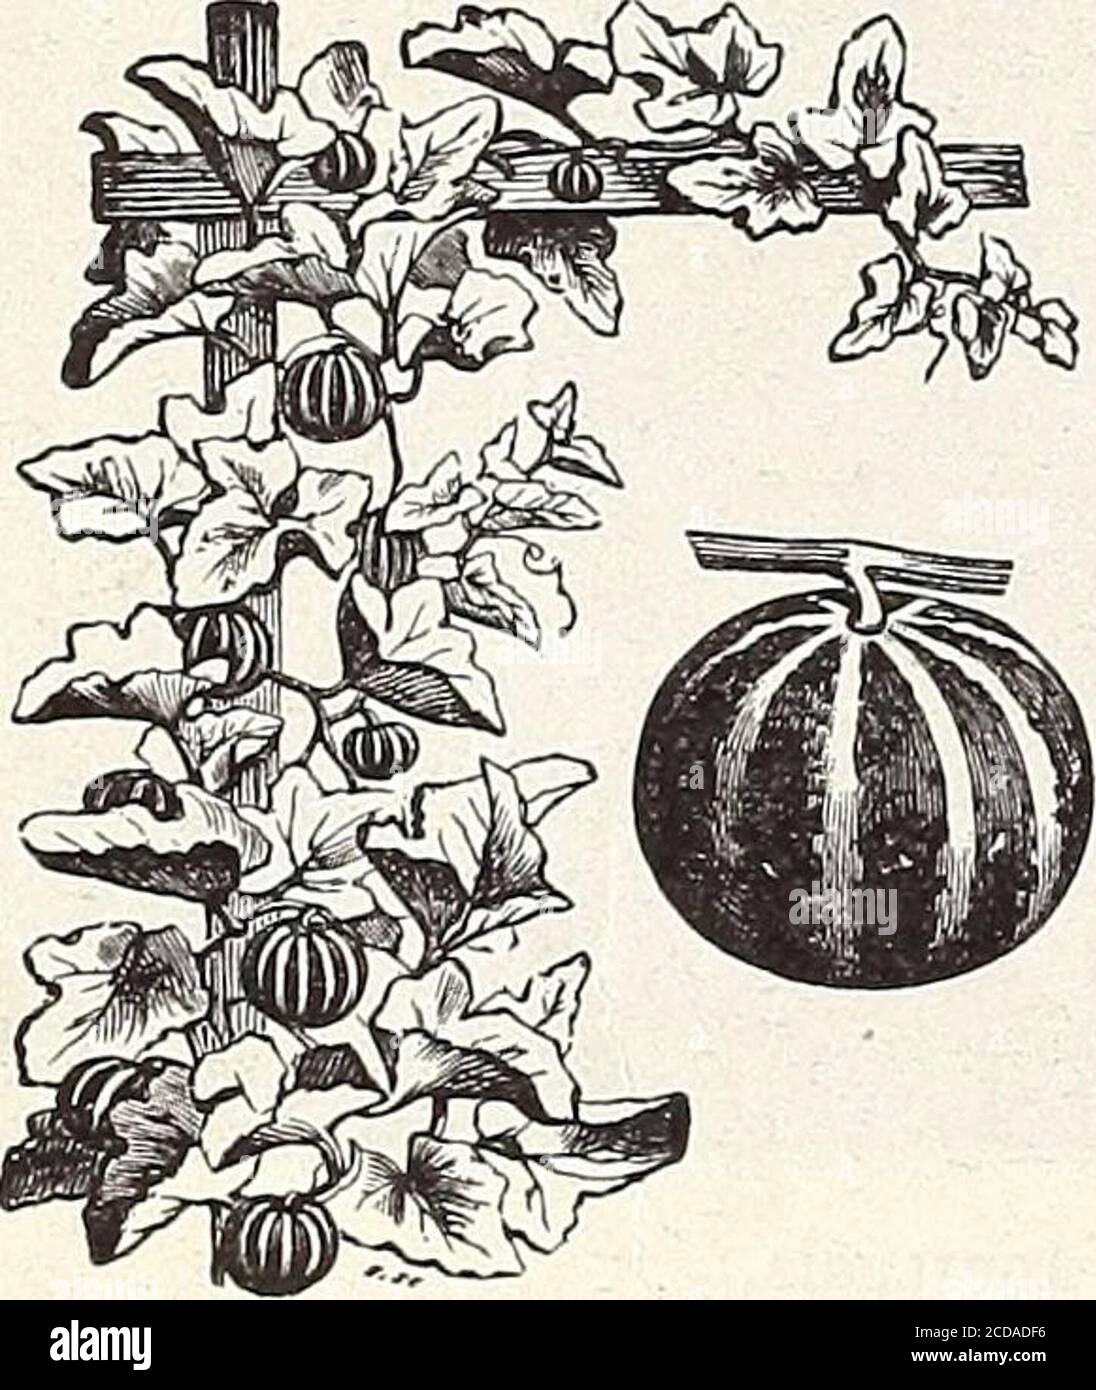 . Farm and garden annual : spring 1913 . BALSAM LADYS SLIPPER.. Pkt. Iberldifolia (Swan River Daisy)—A very pretty dwarf-growing plant, coveredall summer with a profusion of blue and white Cineraria-like blossoms, iys foot.H. H. A 5 BROWALLIA.Elata. Coerulea-—Large, sky-blue flowers -with a white center, iy2 feet. H. H. A.... 5Speciosa Major—A very profuse blooming plant growing freely in rich soil. Theblooms are large, of a rare ultramarine blue color. Excellent for hangingbaskets, and especially valuable as a pot plant for winter and spring flowering.. 10 BRYONOPSIS. Lacinosa—A beautiful cli Stock Photo